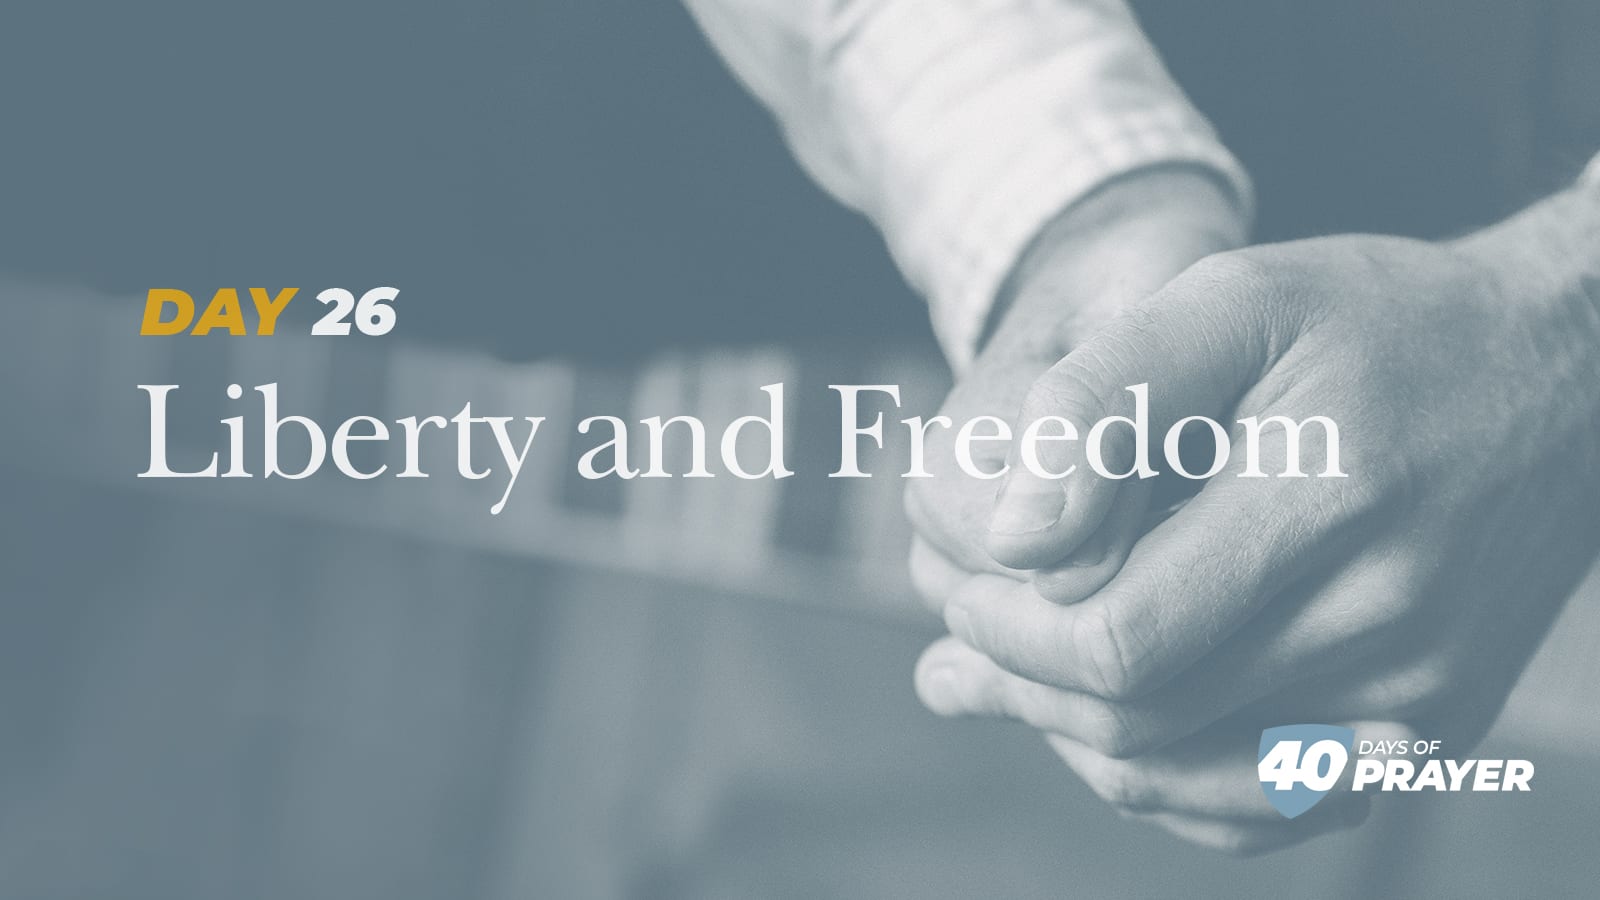 40 days of Prayer Day 26: Liberty and Freedom